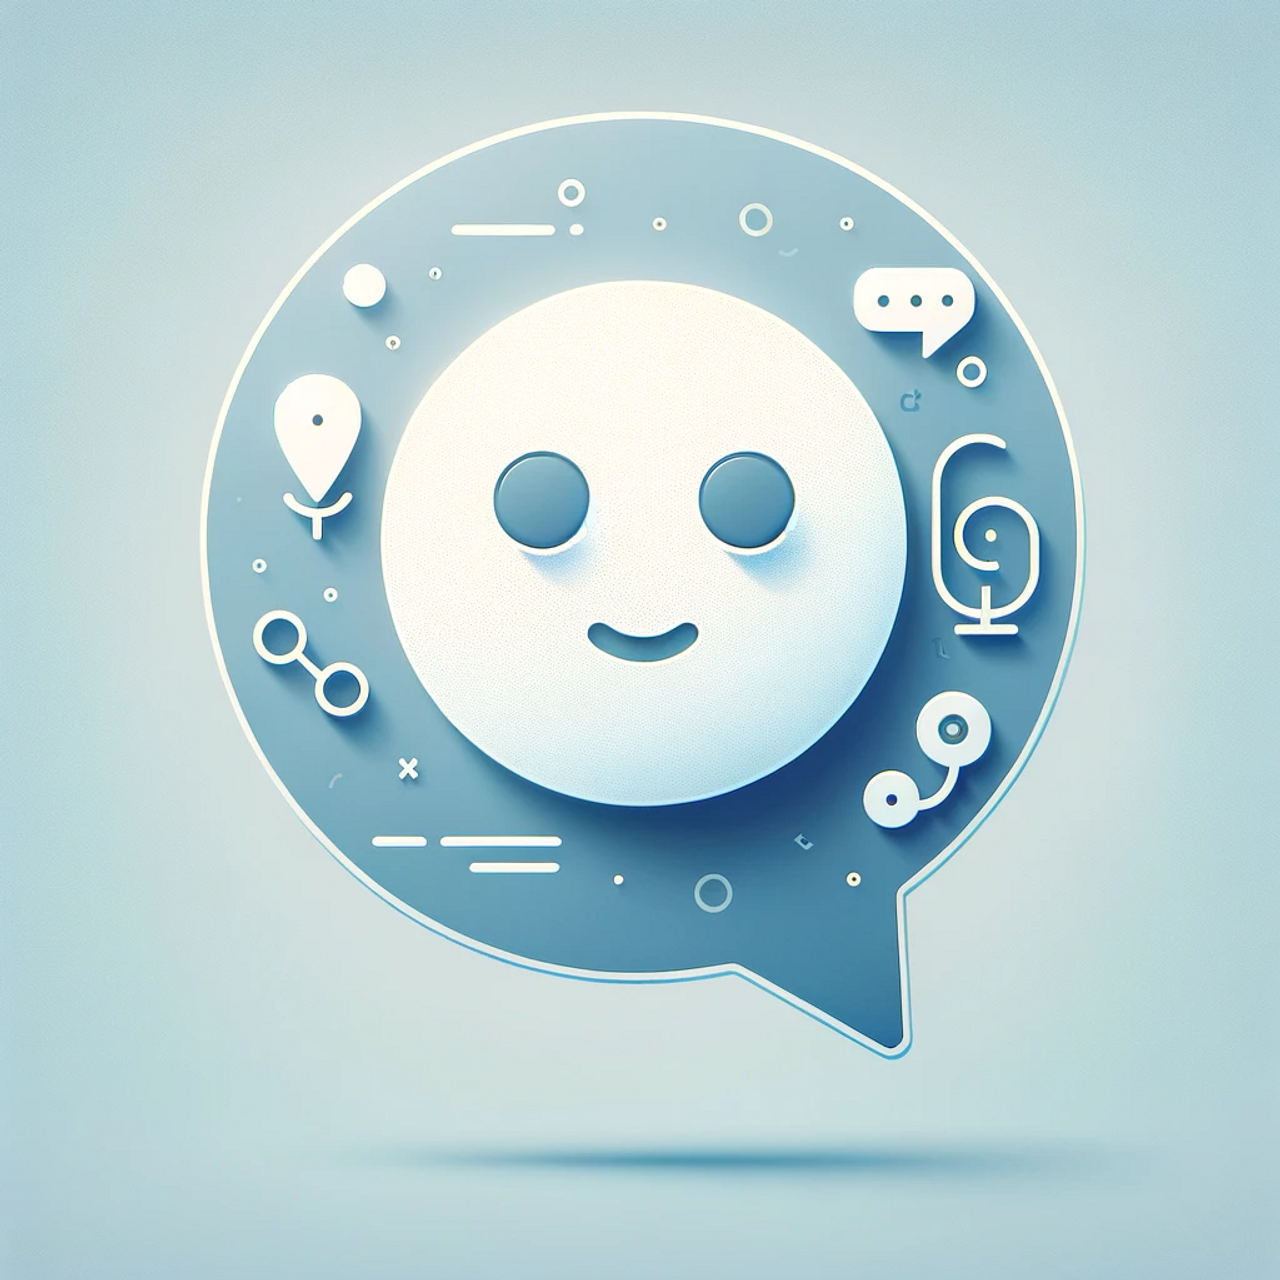 DALL·E 2023-12-06 13.26.39 - A simplistic and abstract representation of conversational AI. The image features a minimalist design with a large, friendly-looking speech bubble in .png